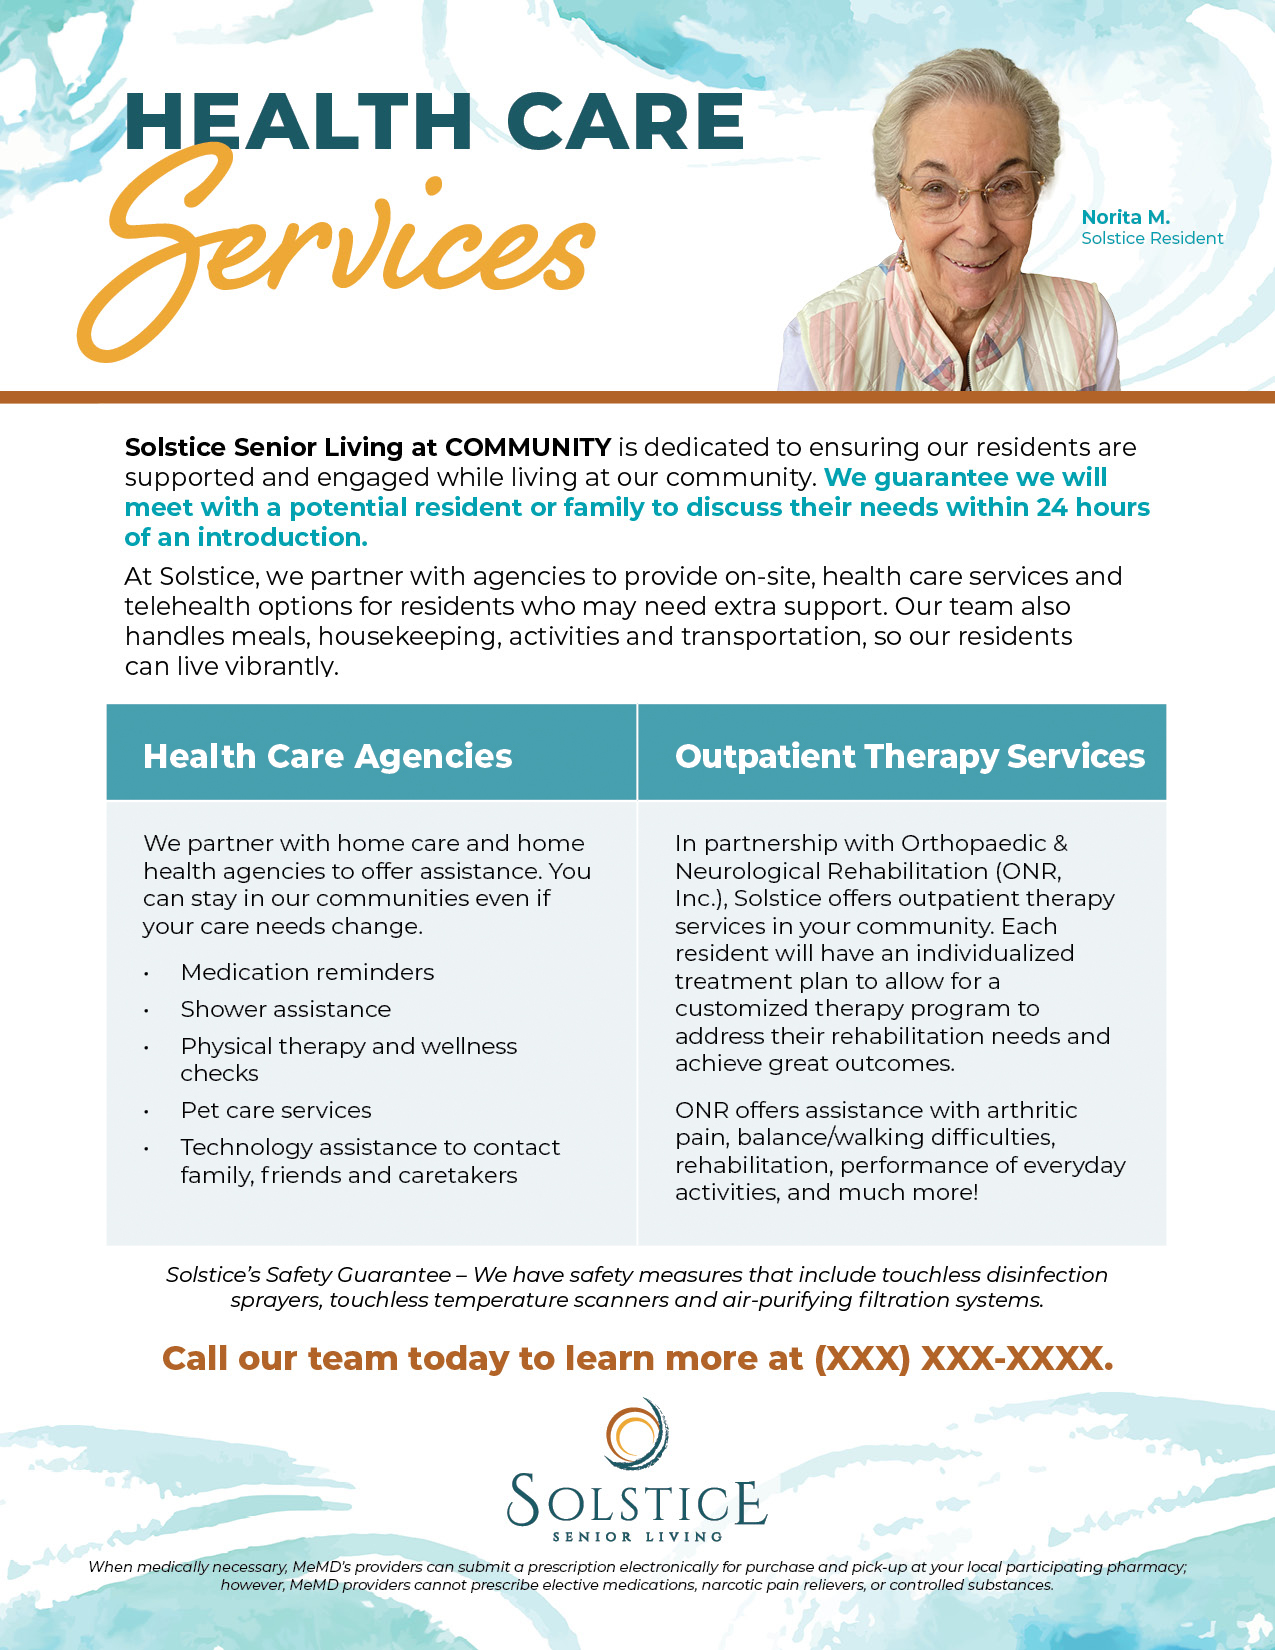 Health Care Services flyer